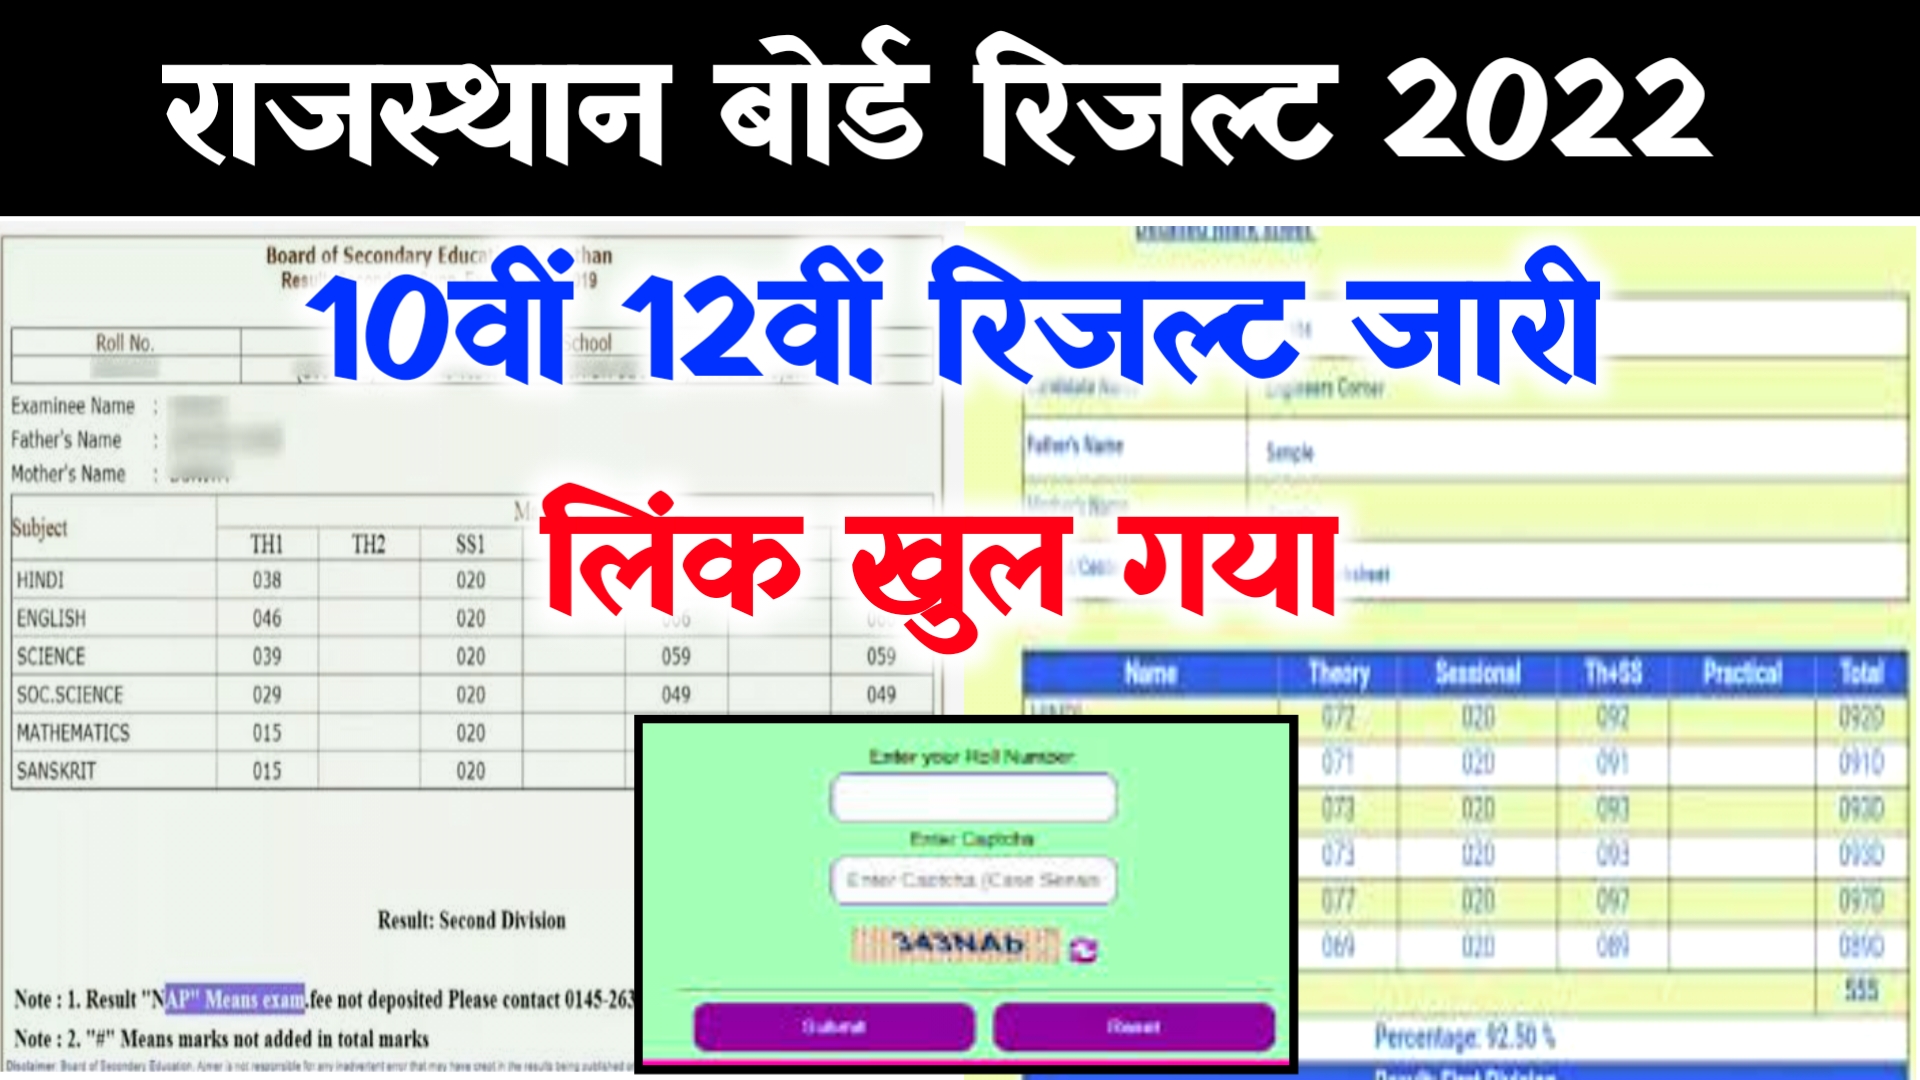 Rbse 10th 12th Result 2022 ~ Download Link @rajresults.nic.in